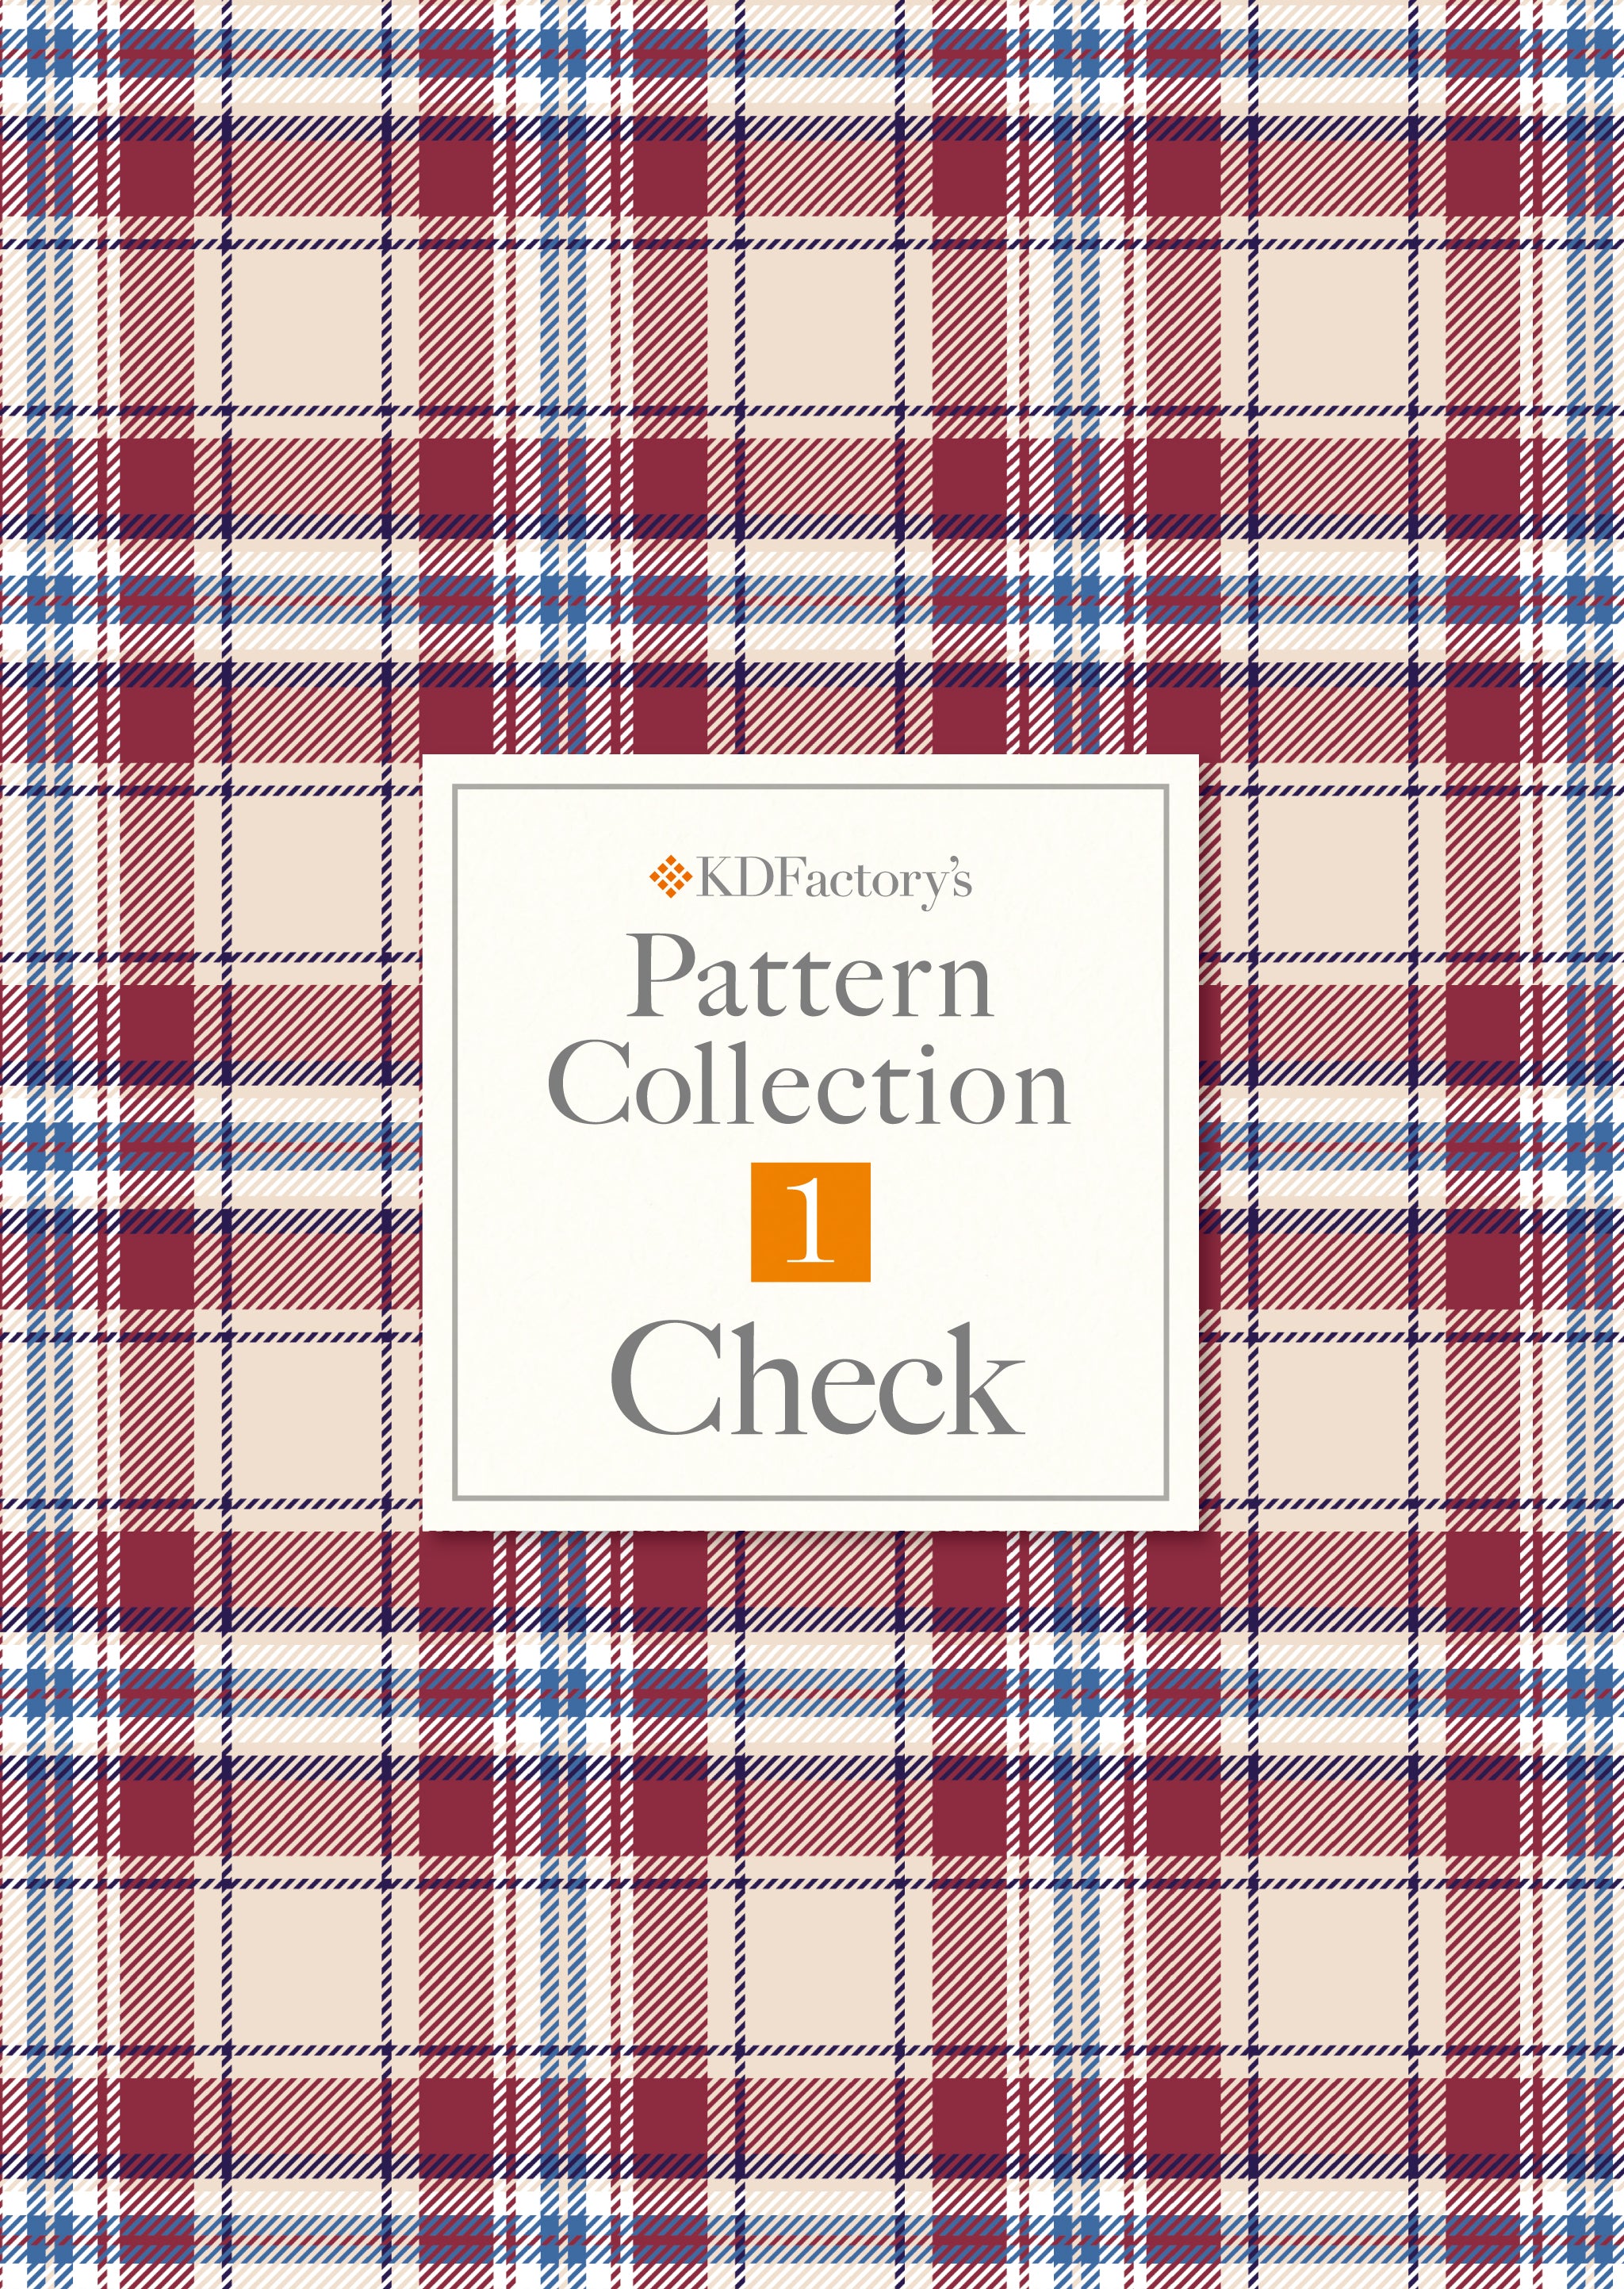 「Pattern Collection」1.Check【チェック】